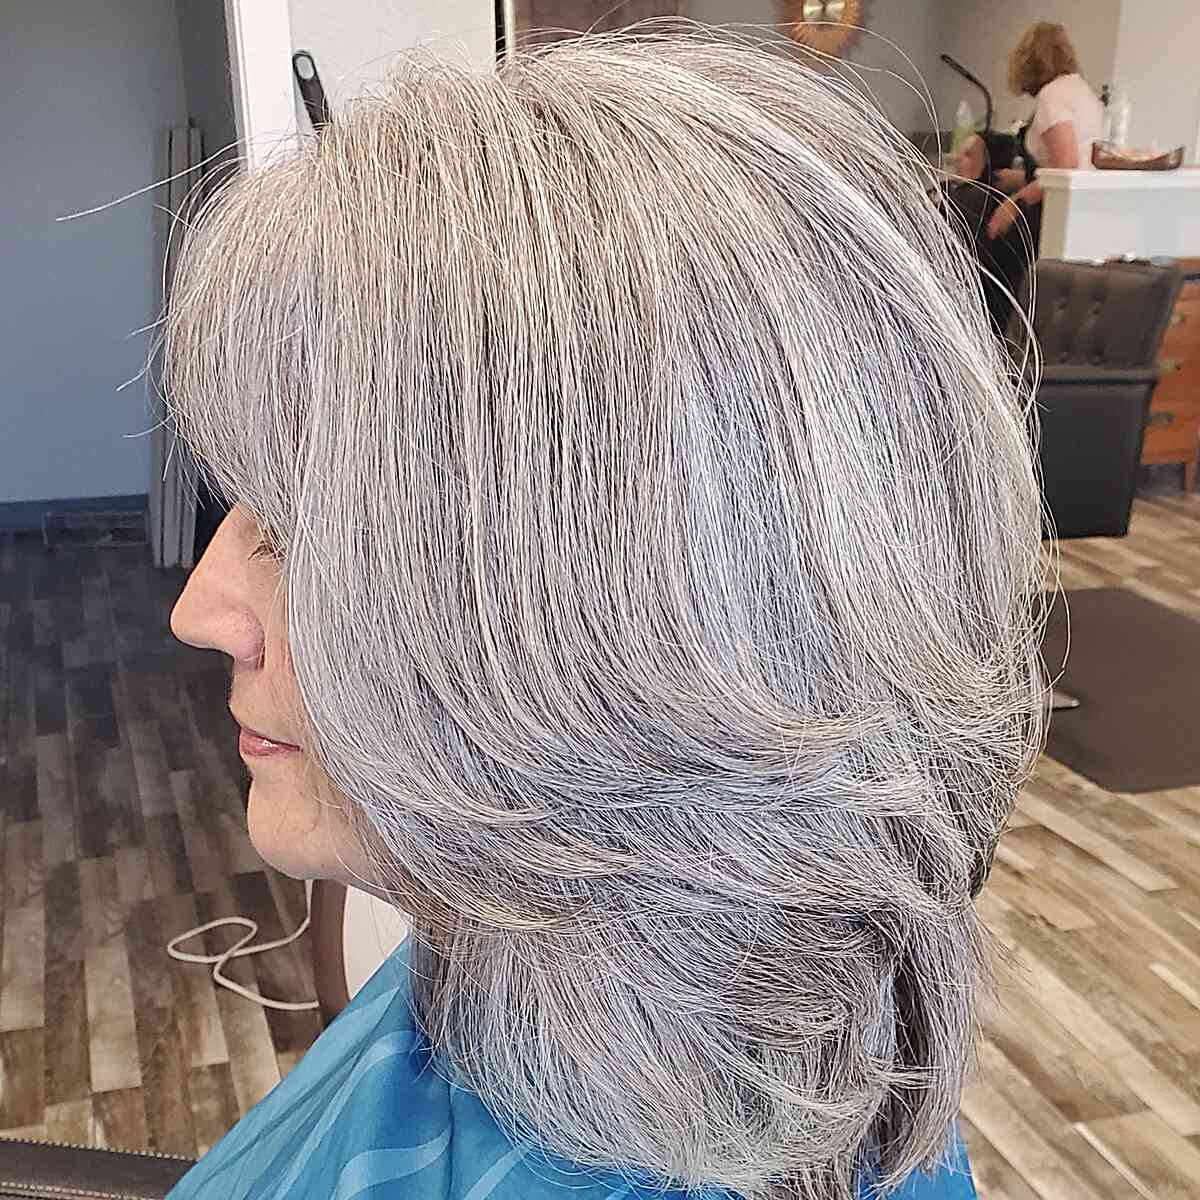 Feathered Ends for Older Women with straight, coarse hair